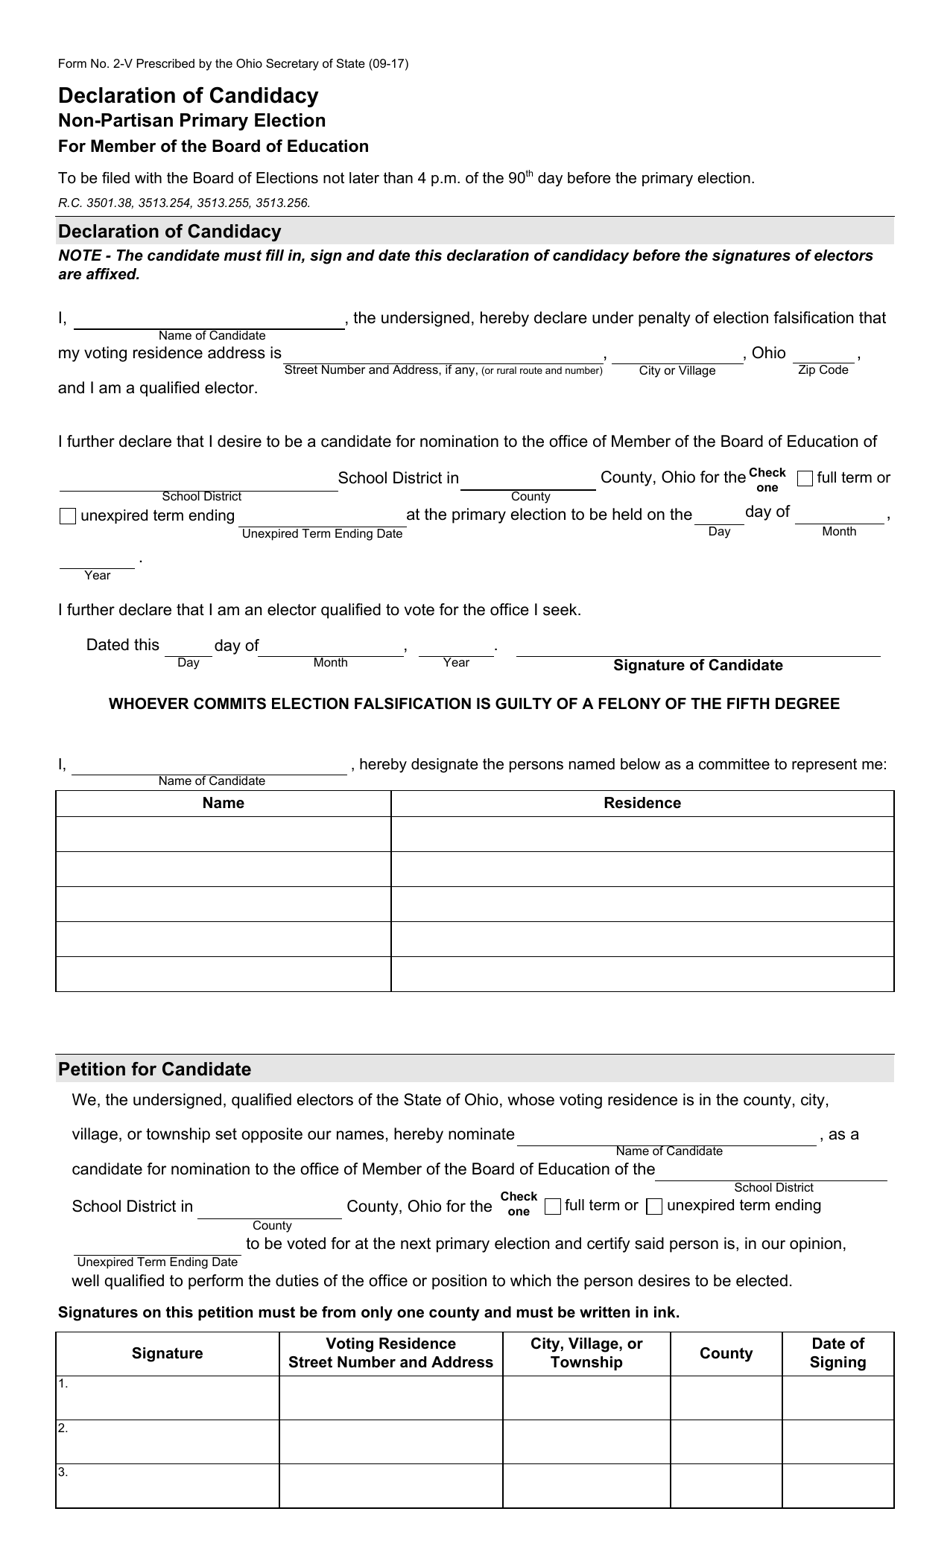 Form 2-V Declaration of Candidacy for Member of the Board of Education - Non-partisan Primary Election - Ohio, Page 1